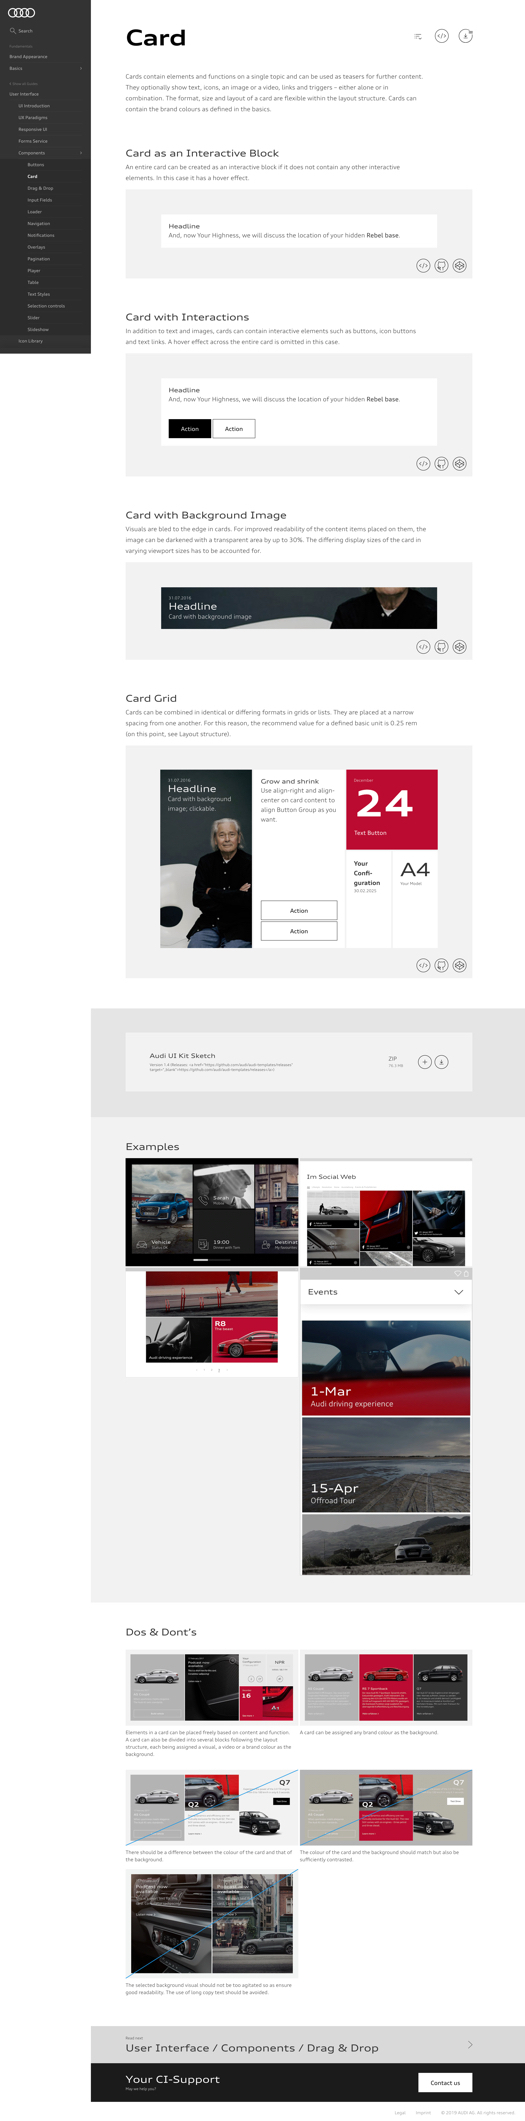 Usage Guidelines for the Card Component for Audi's design system